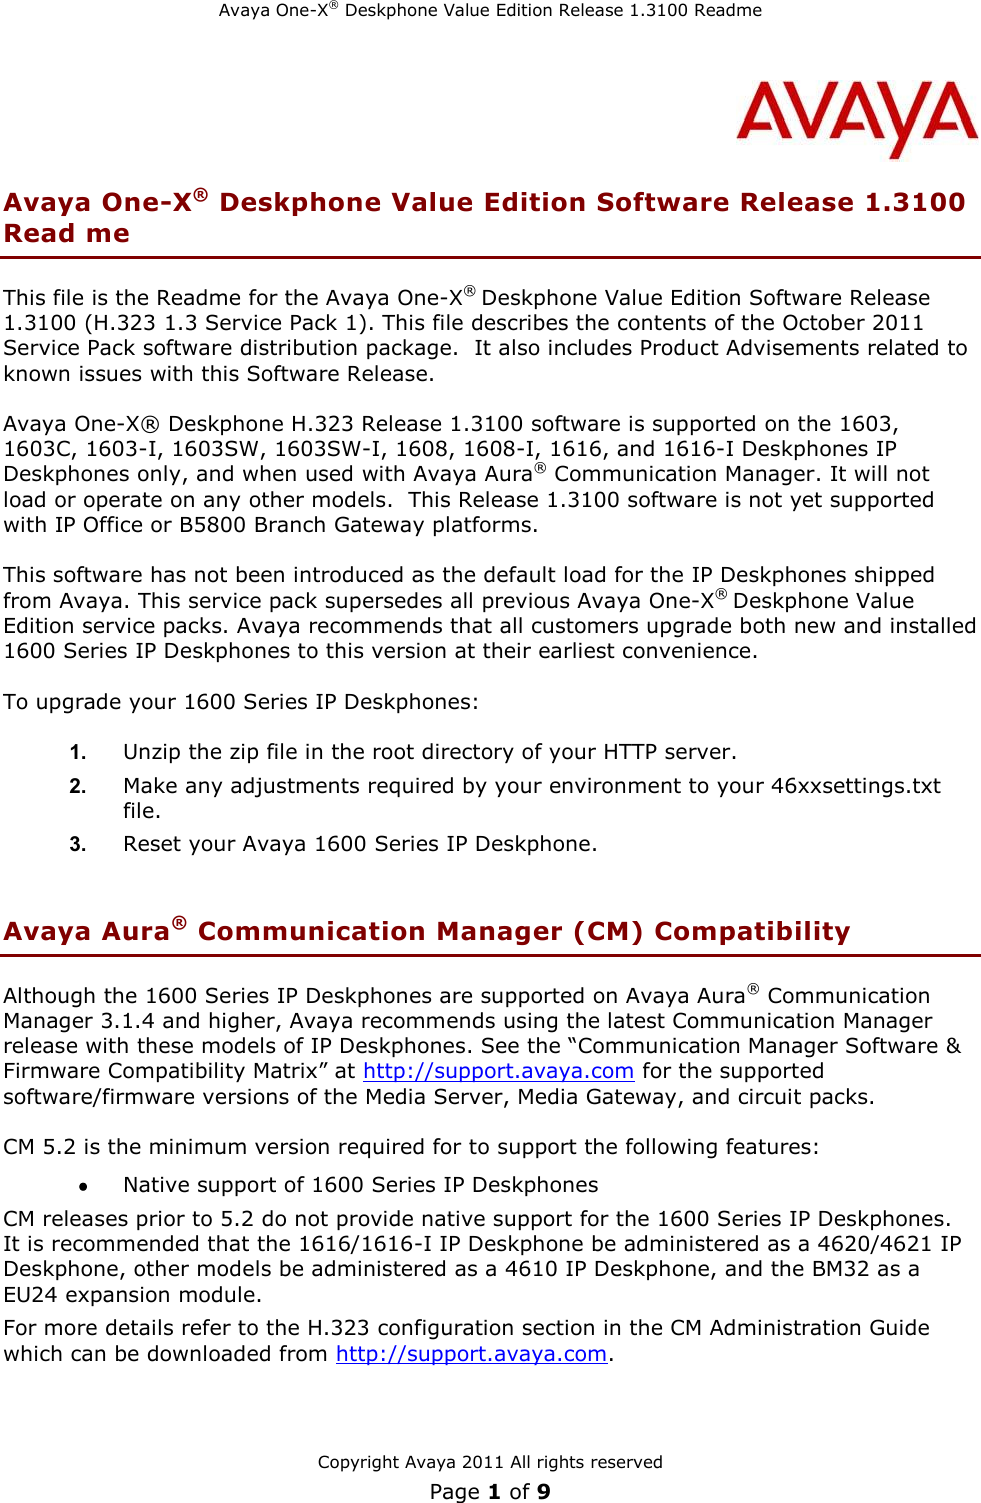 Page 1 of 9 - Avaya Avaya-1600-Series-H323-3-Service-Pack-1-Users-Manual- H.323 Release 1.3100 Readme  Avaya-1600-series-h323-3-service-pack-1-users-manual